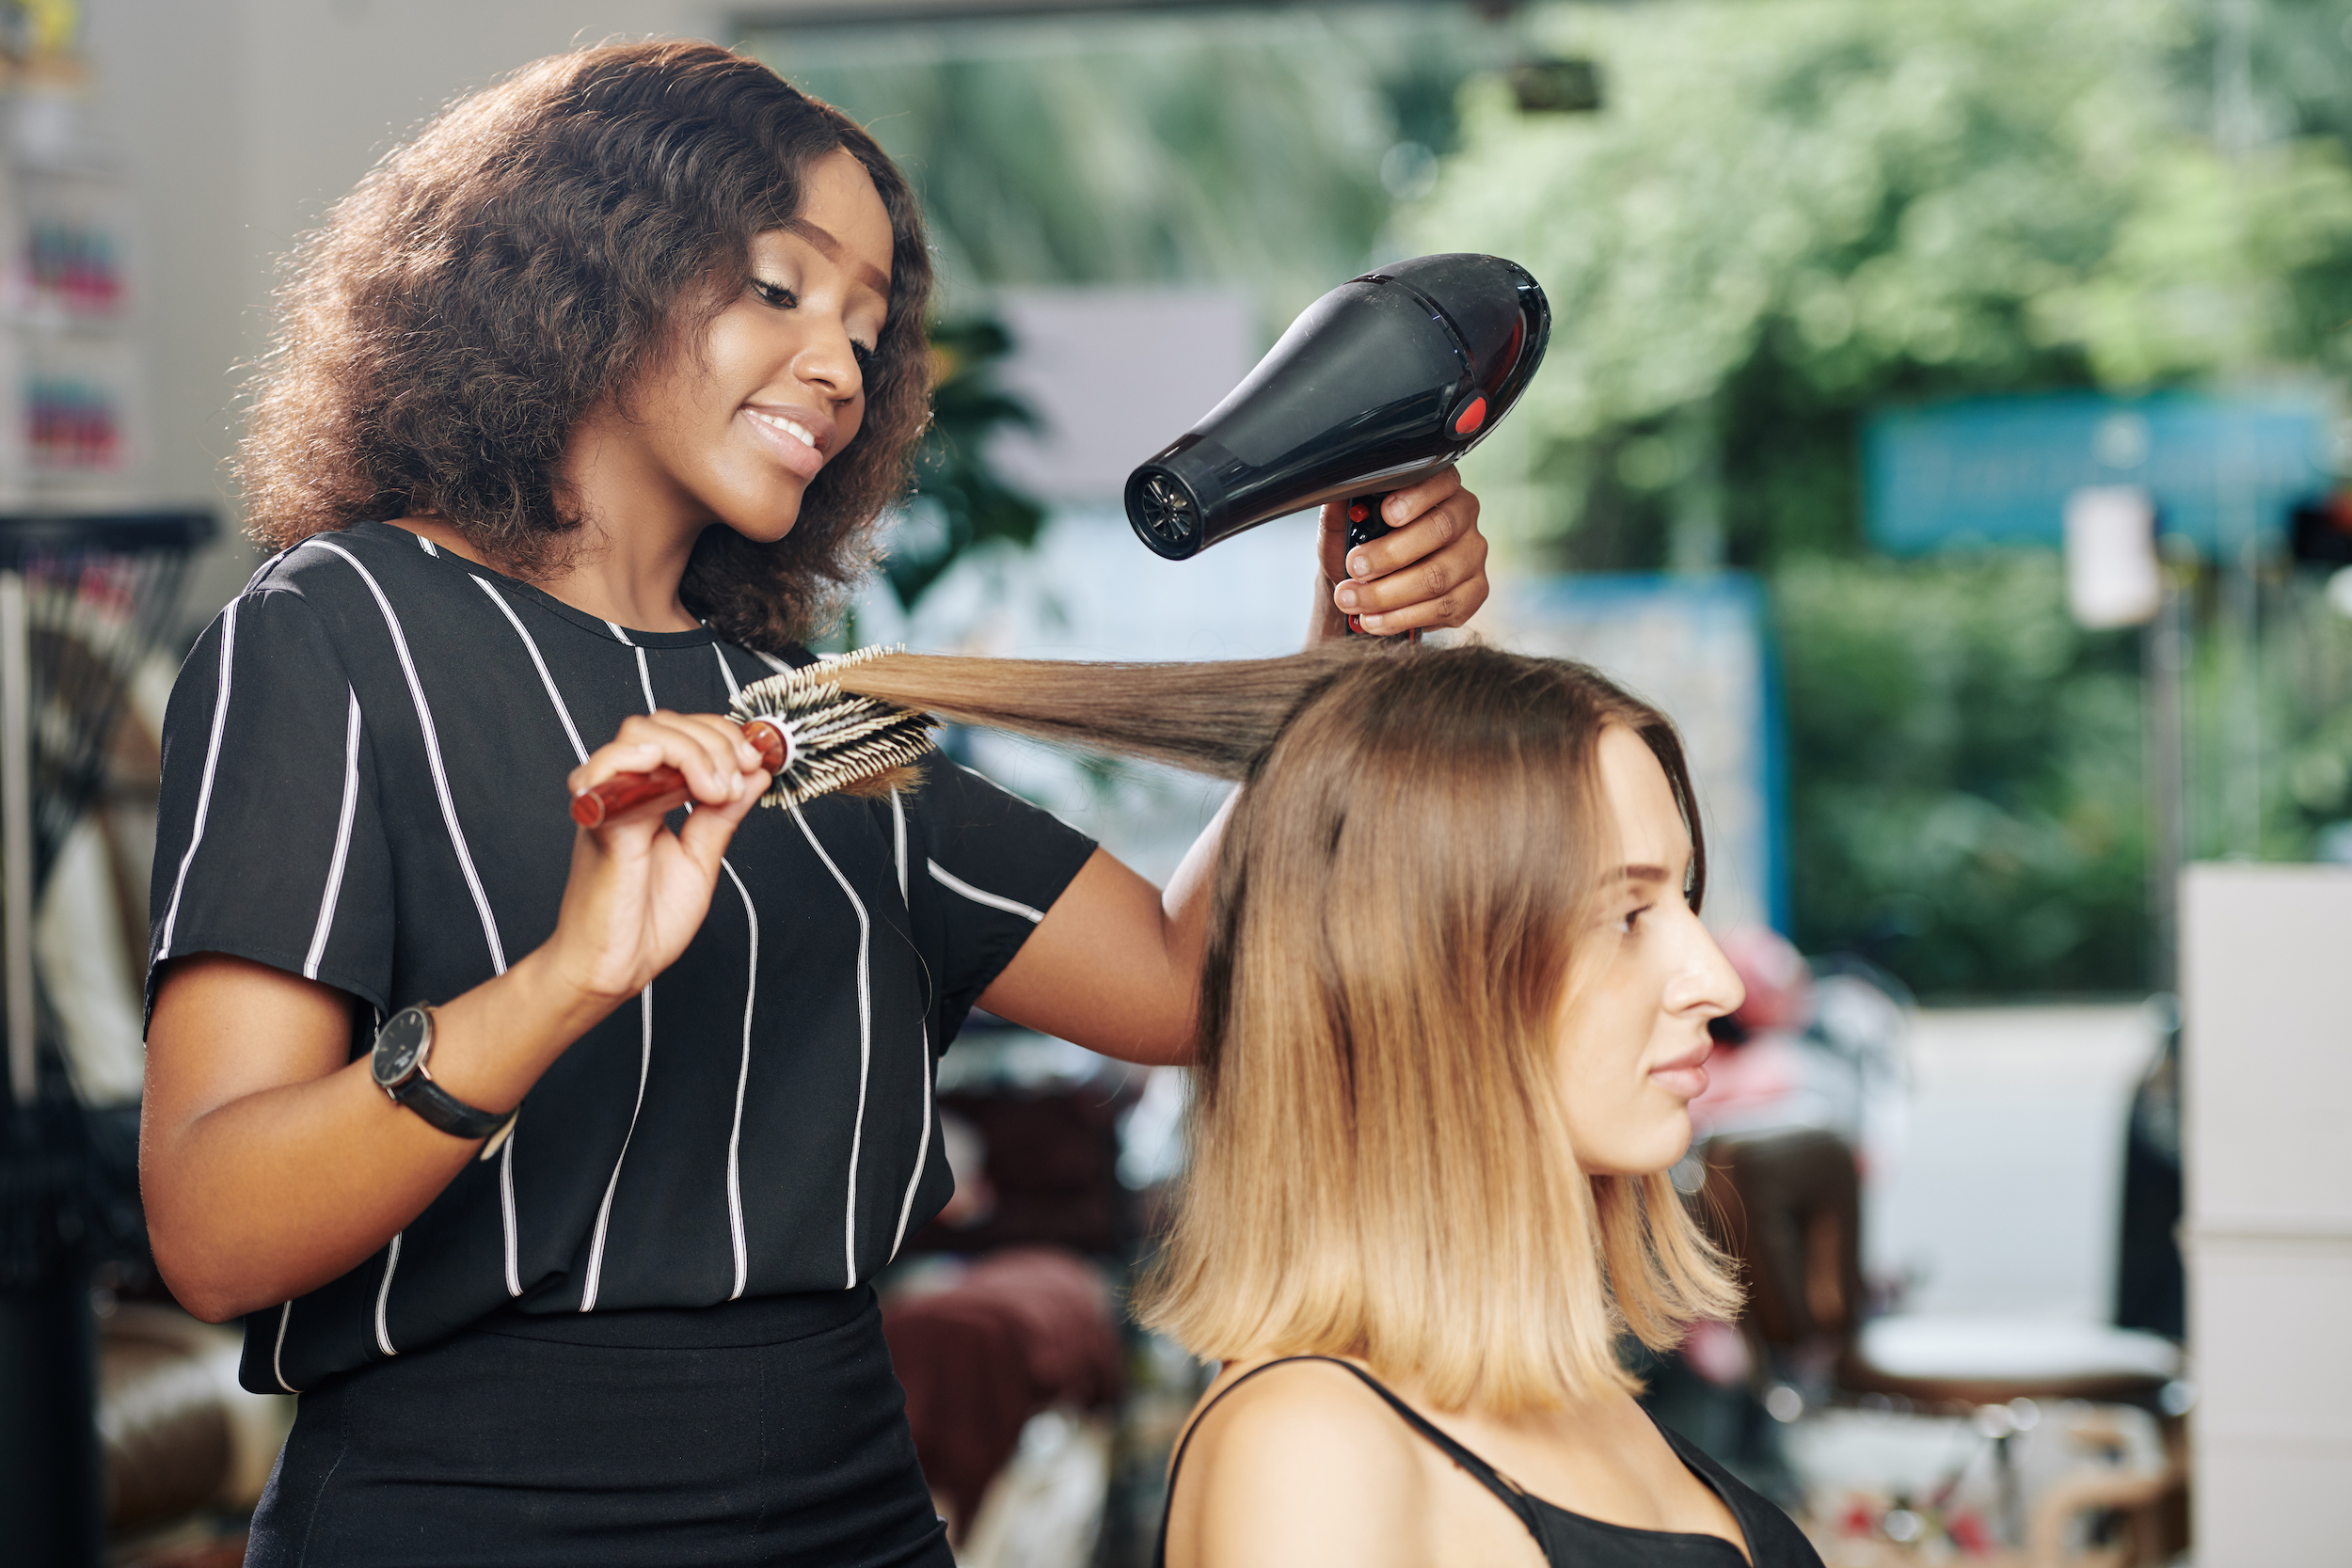 Woman getting her hair blow dried